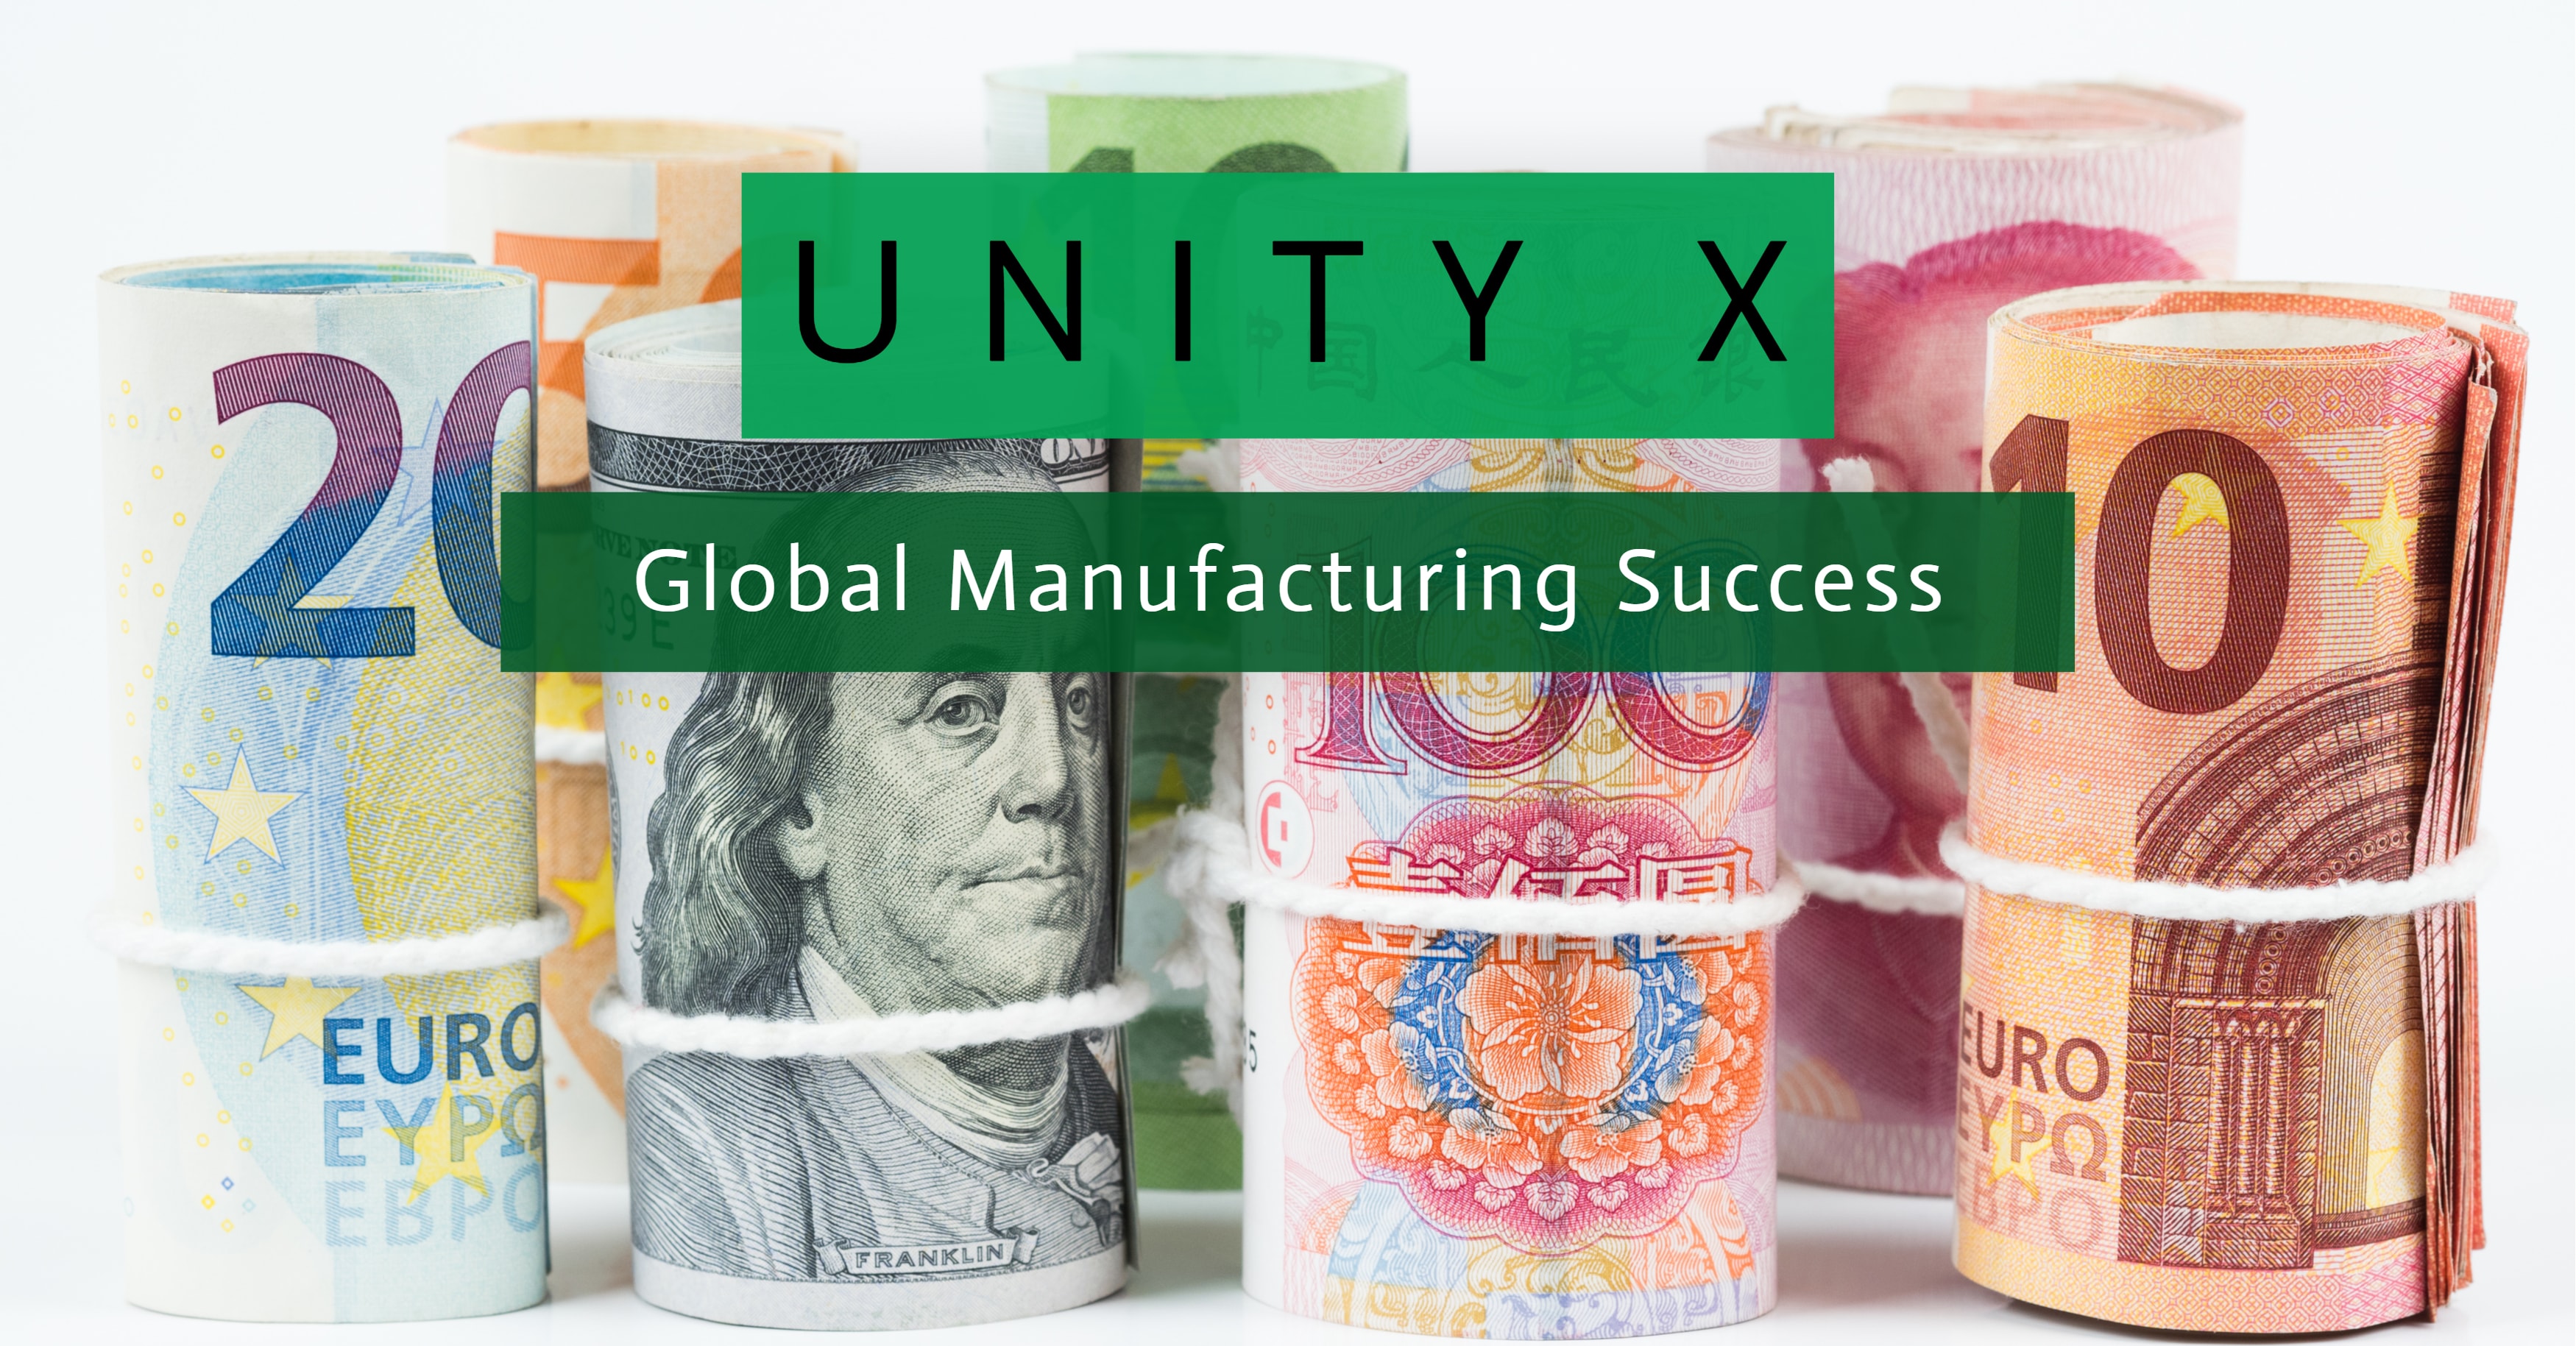 Unity X Global Manufacturing Success